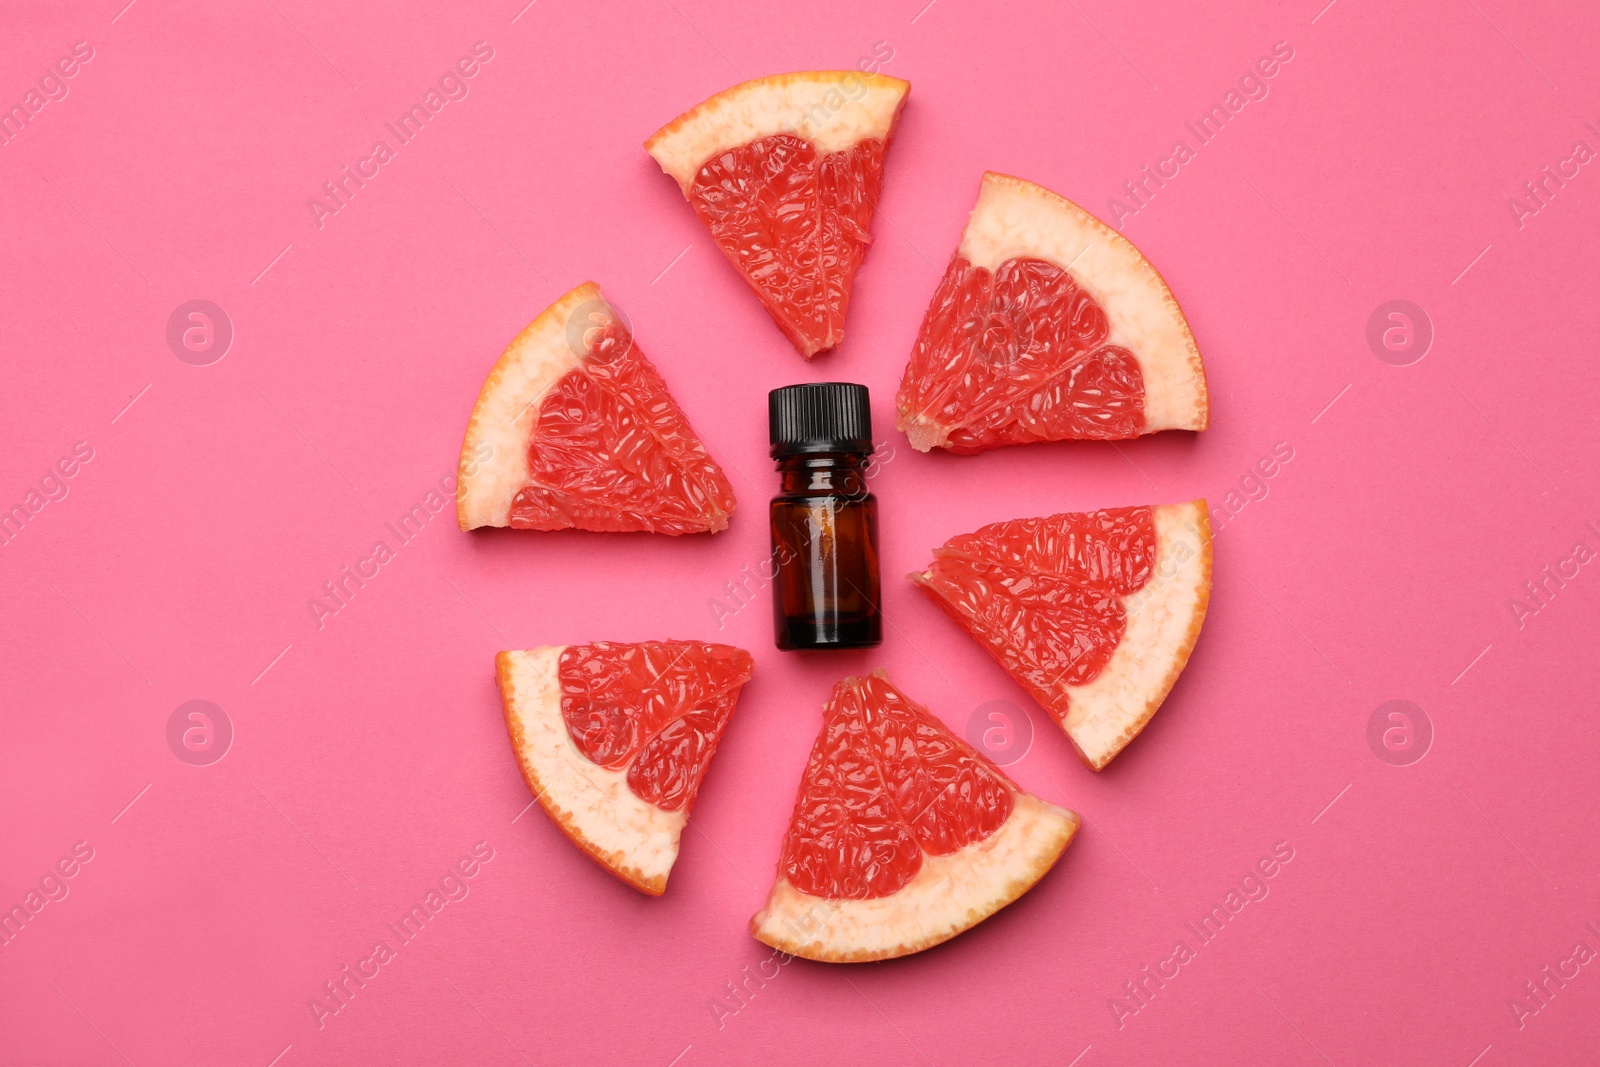 Photo of Bottle of citrus essential oil and fresh grapefruit slices on pink background, flat lay